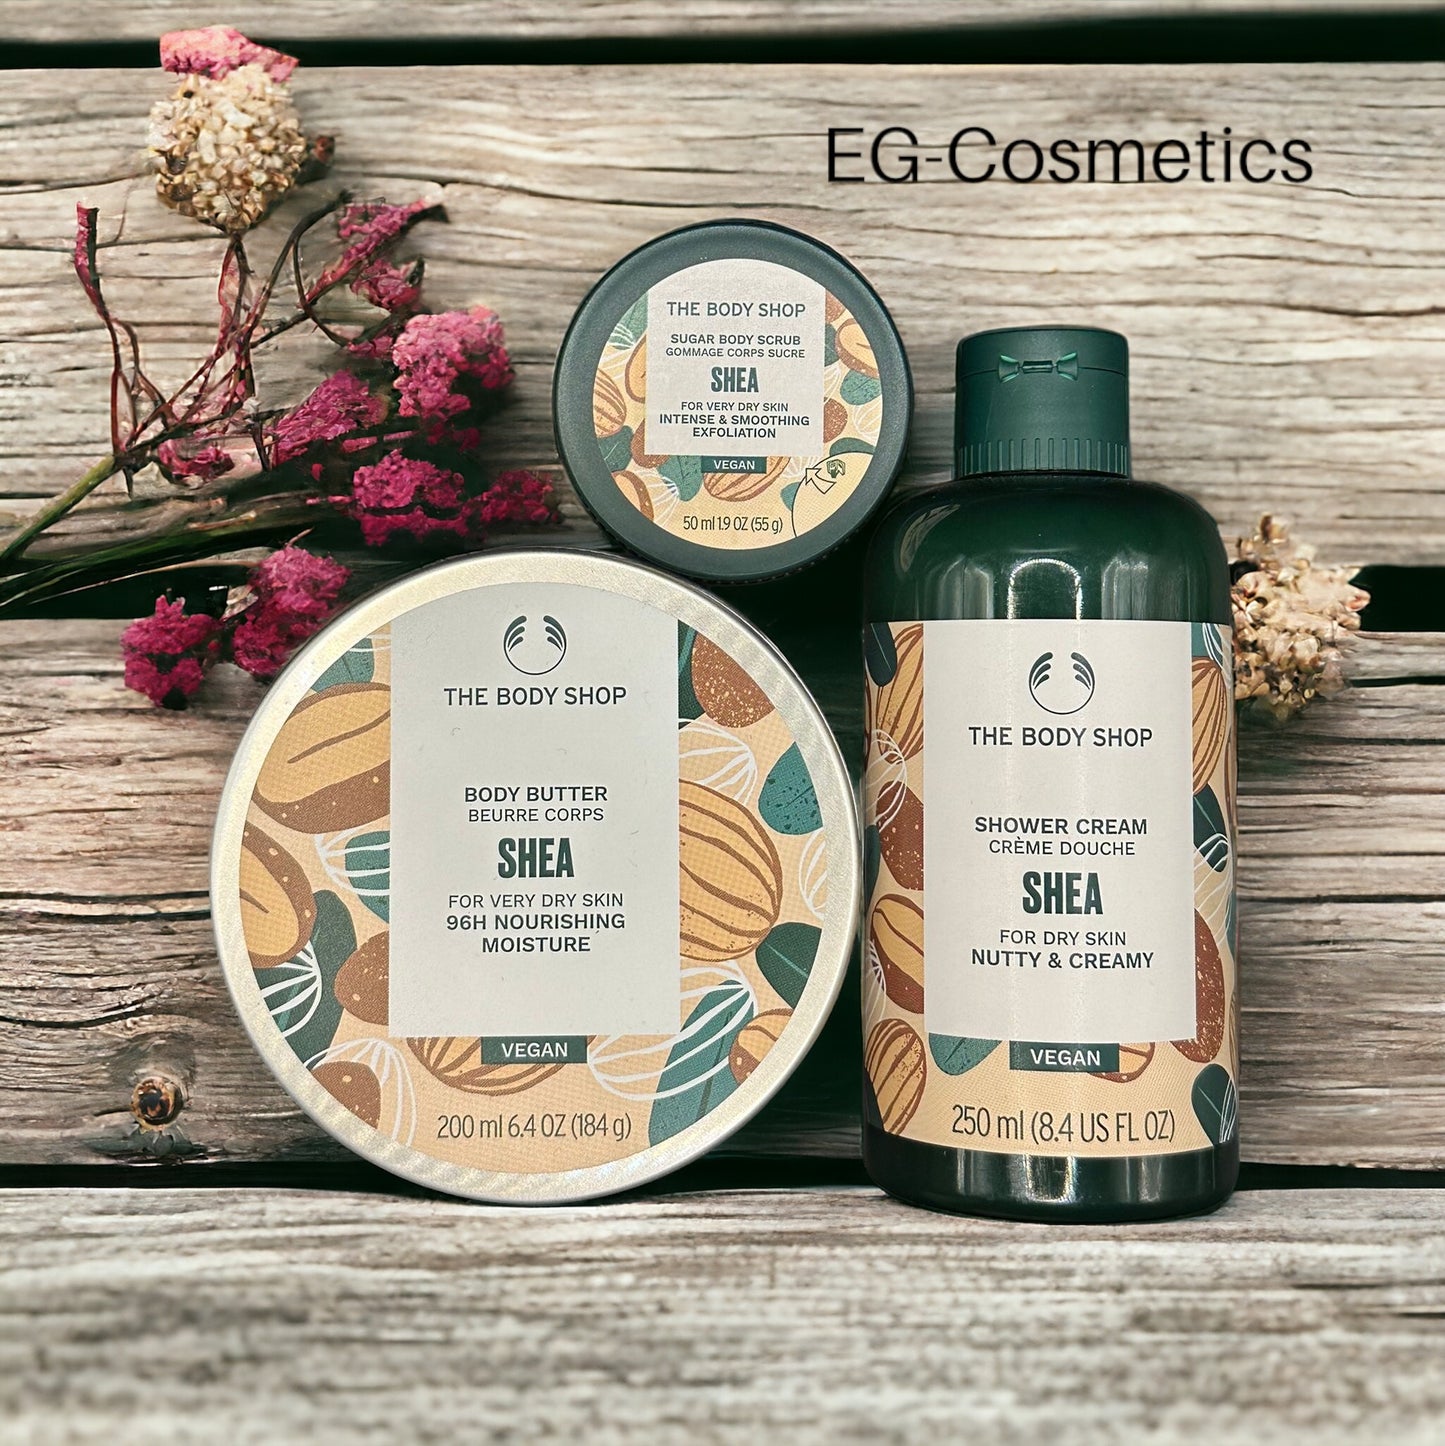 The Body Shop by EG-Cosmetics "SHEA BUTTER" 3-Piece Gift Set by EG-Cosmetics